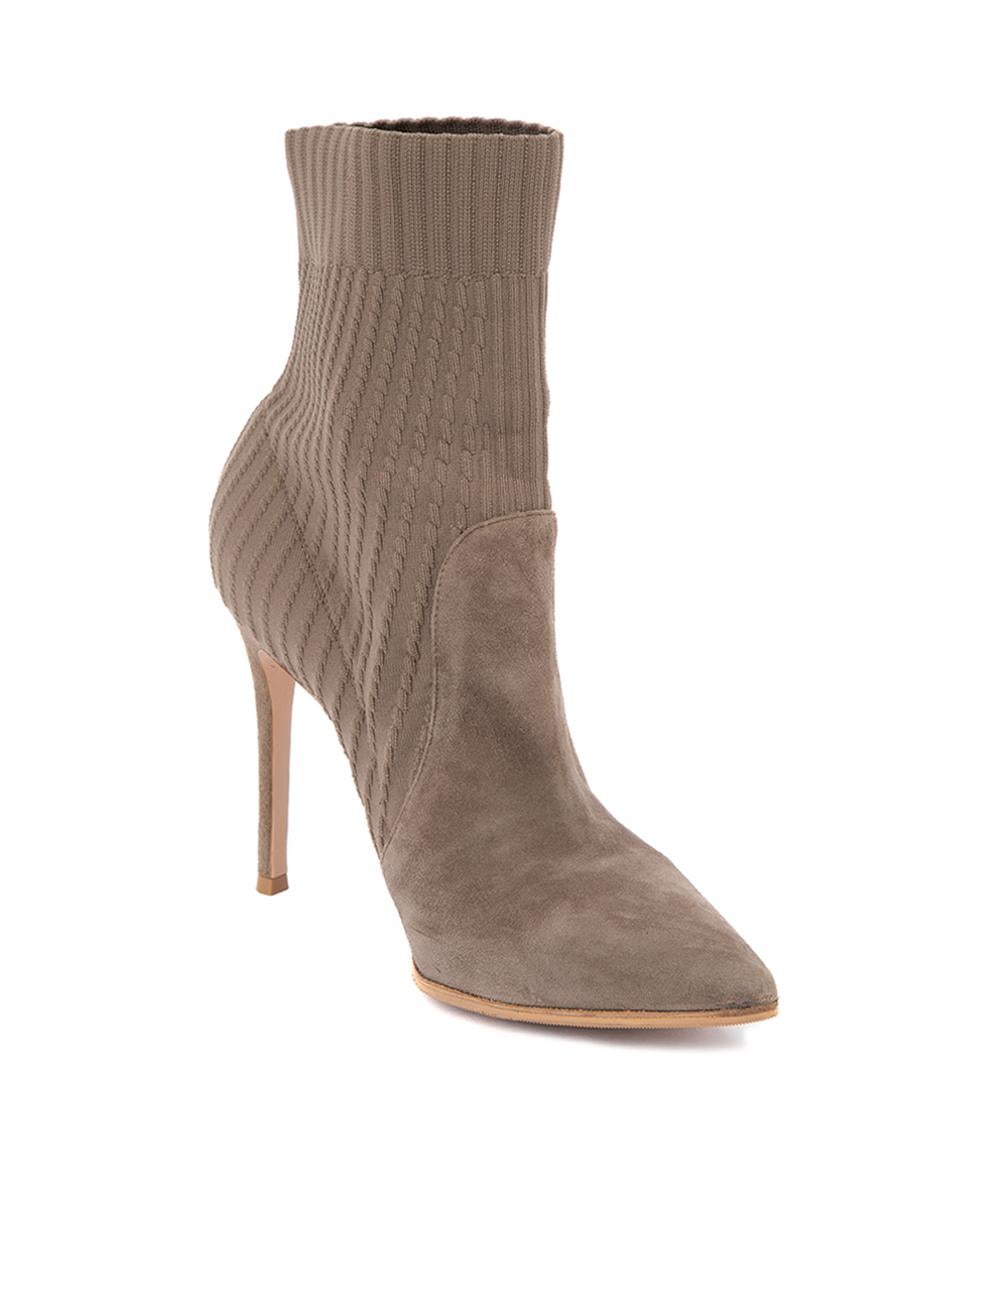 CONDITION is Very good. Minimal wear to shoes is evident. Wear to external suede material and wear to toes on both shoes on this used Gianvito Rossi designer resale item. Please note that this item has been resoled for extra protection.
 
 Details
 